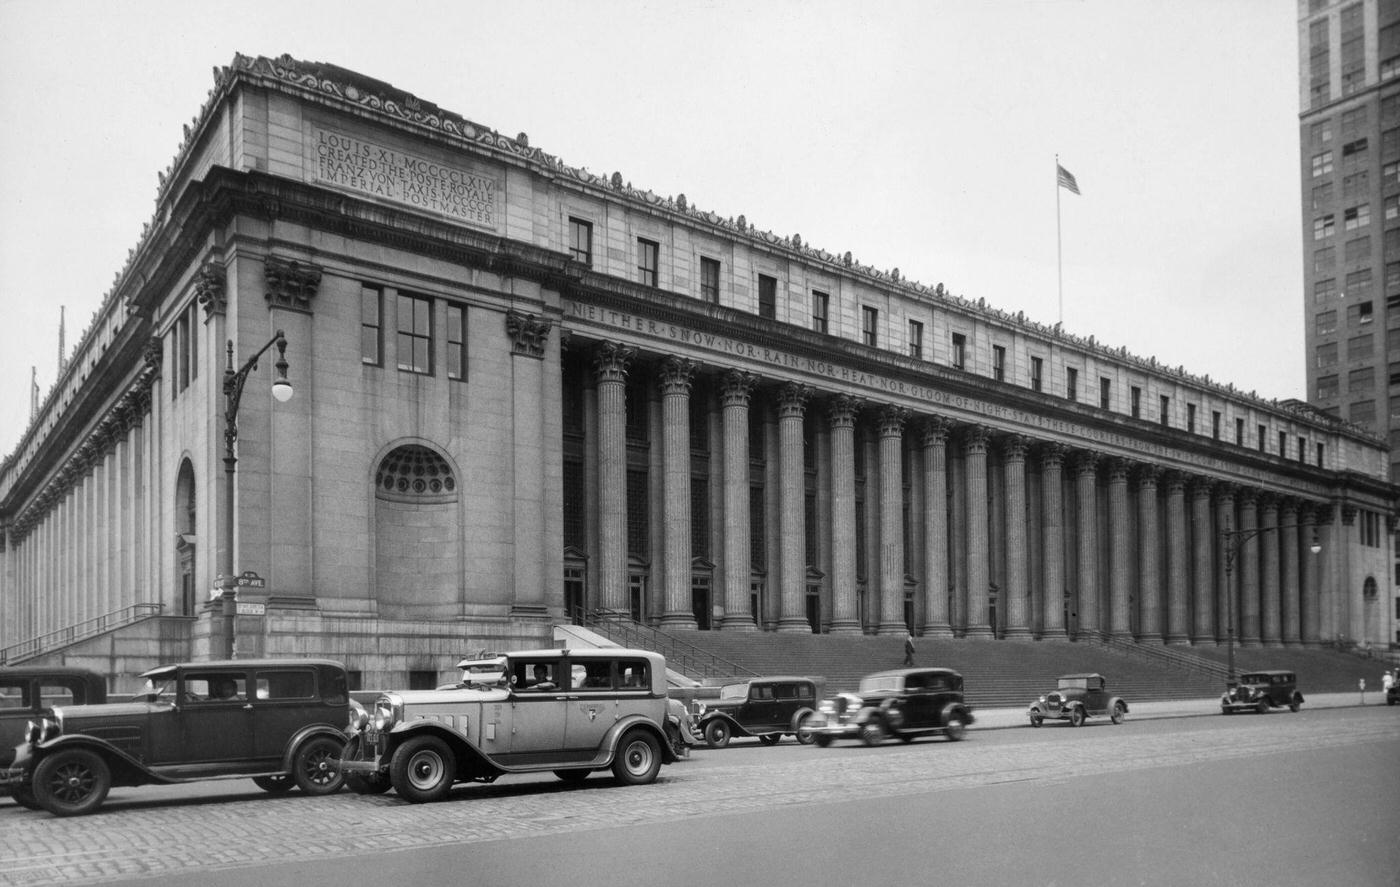 General Post Office Building, Cars Passing And An Inscription Above The Colonnade Bears The U.s. Postal Service Creed On Eighth Avenue, Manhattan, 1935